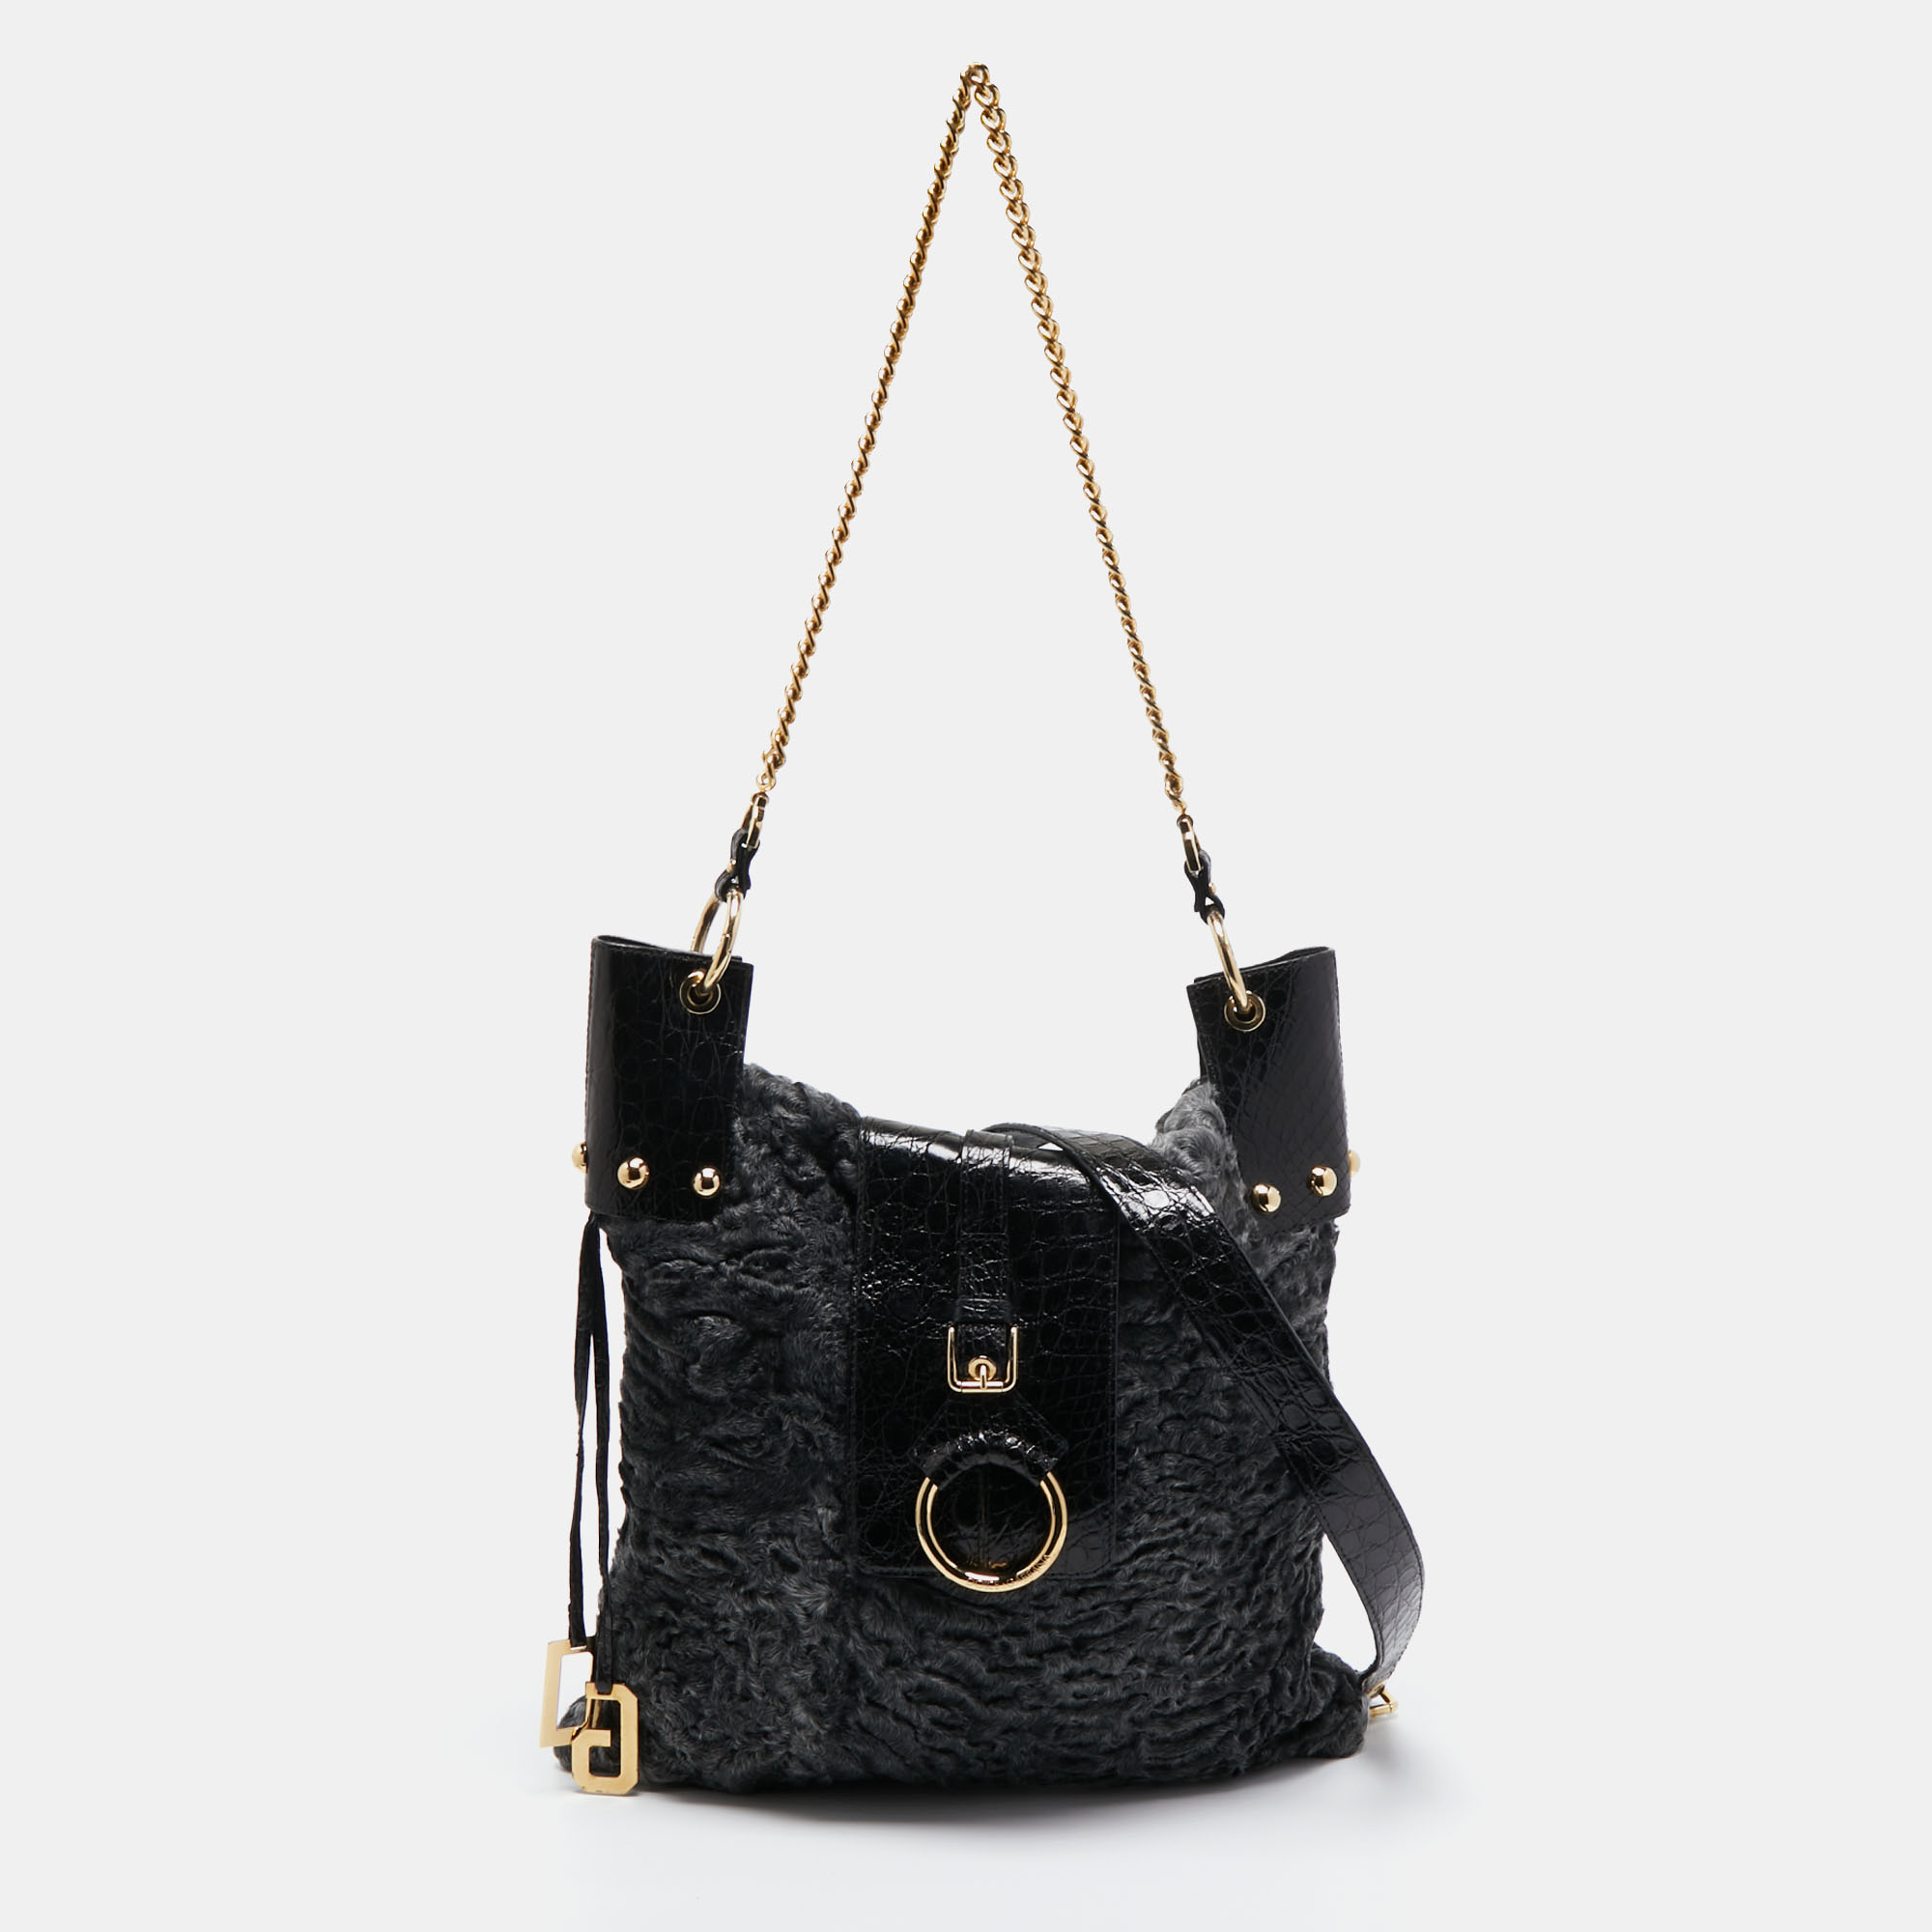 Dolce & gabbana  black/grey embossed leather and fur tote